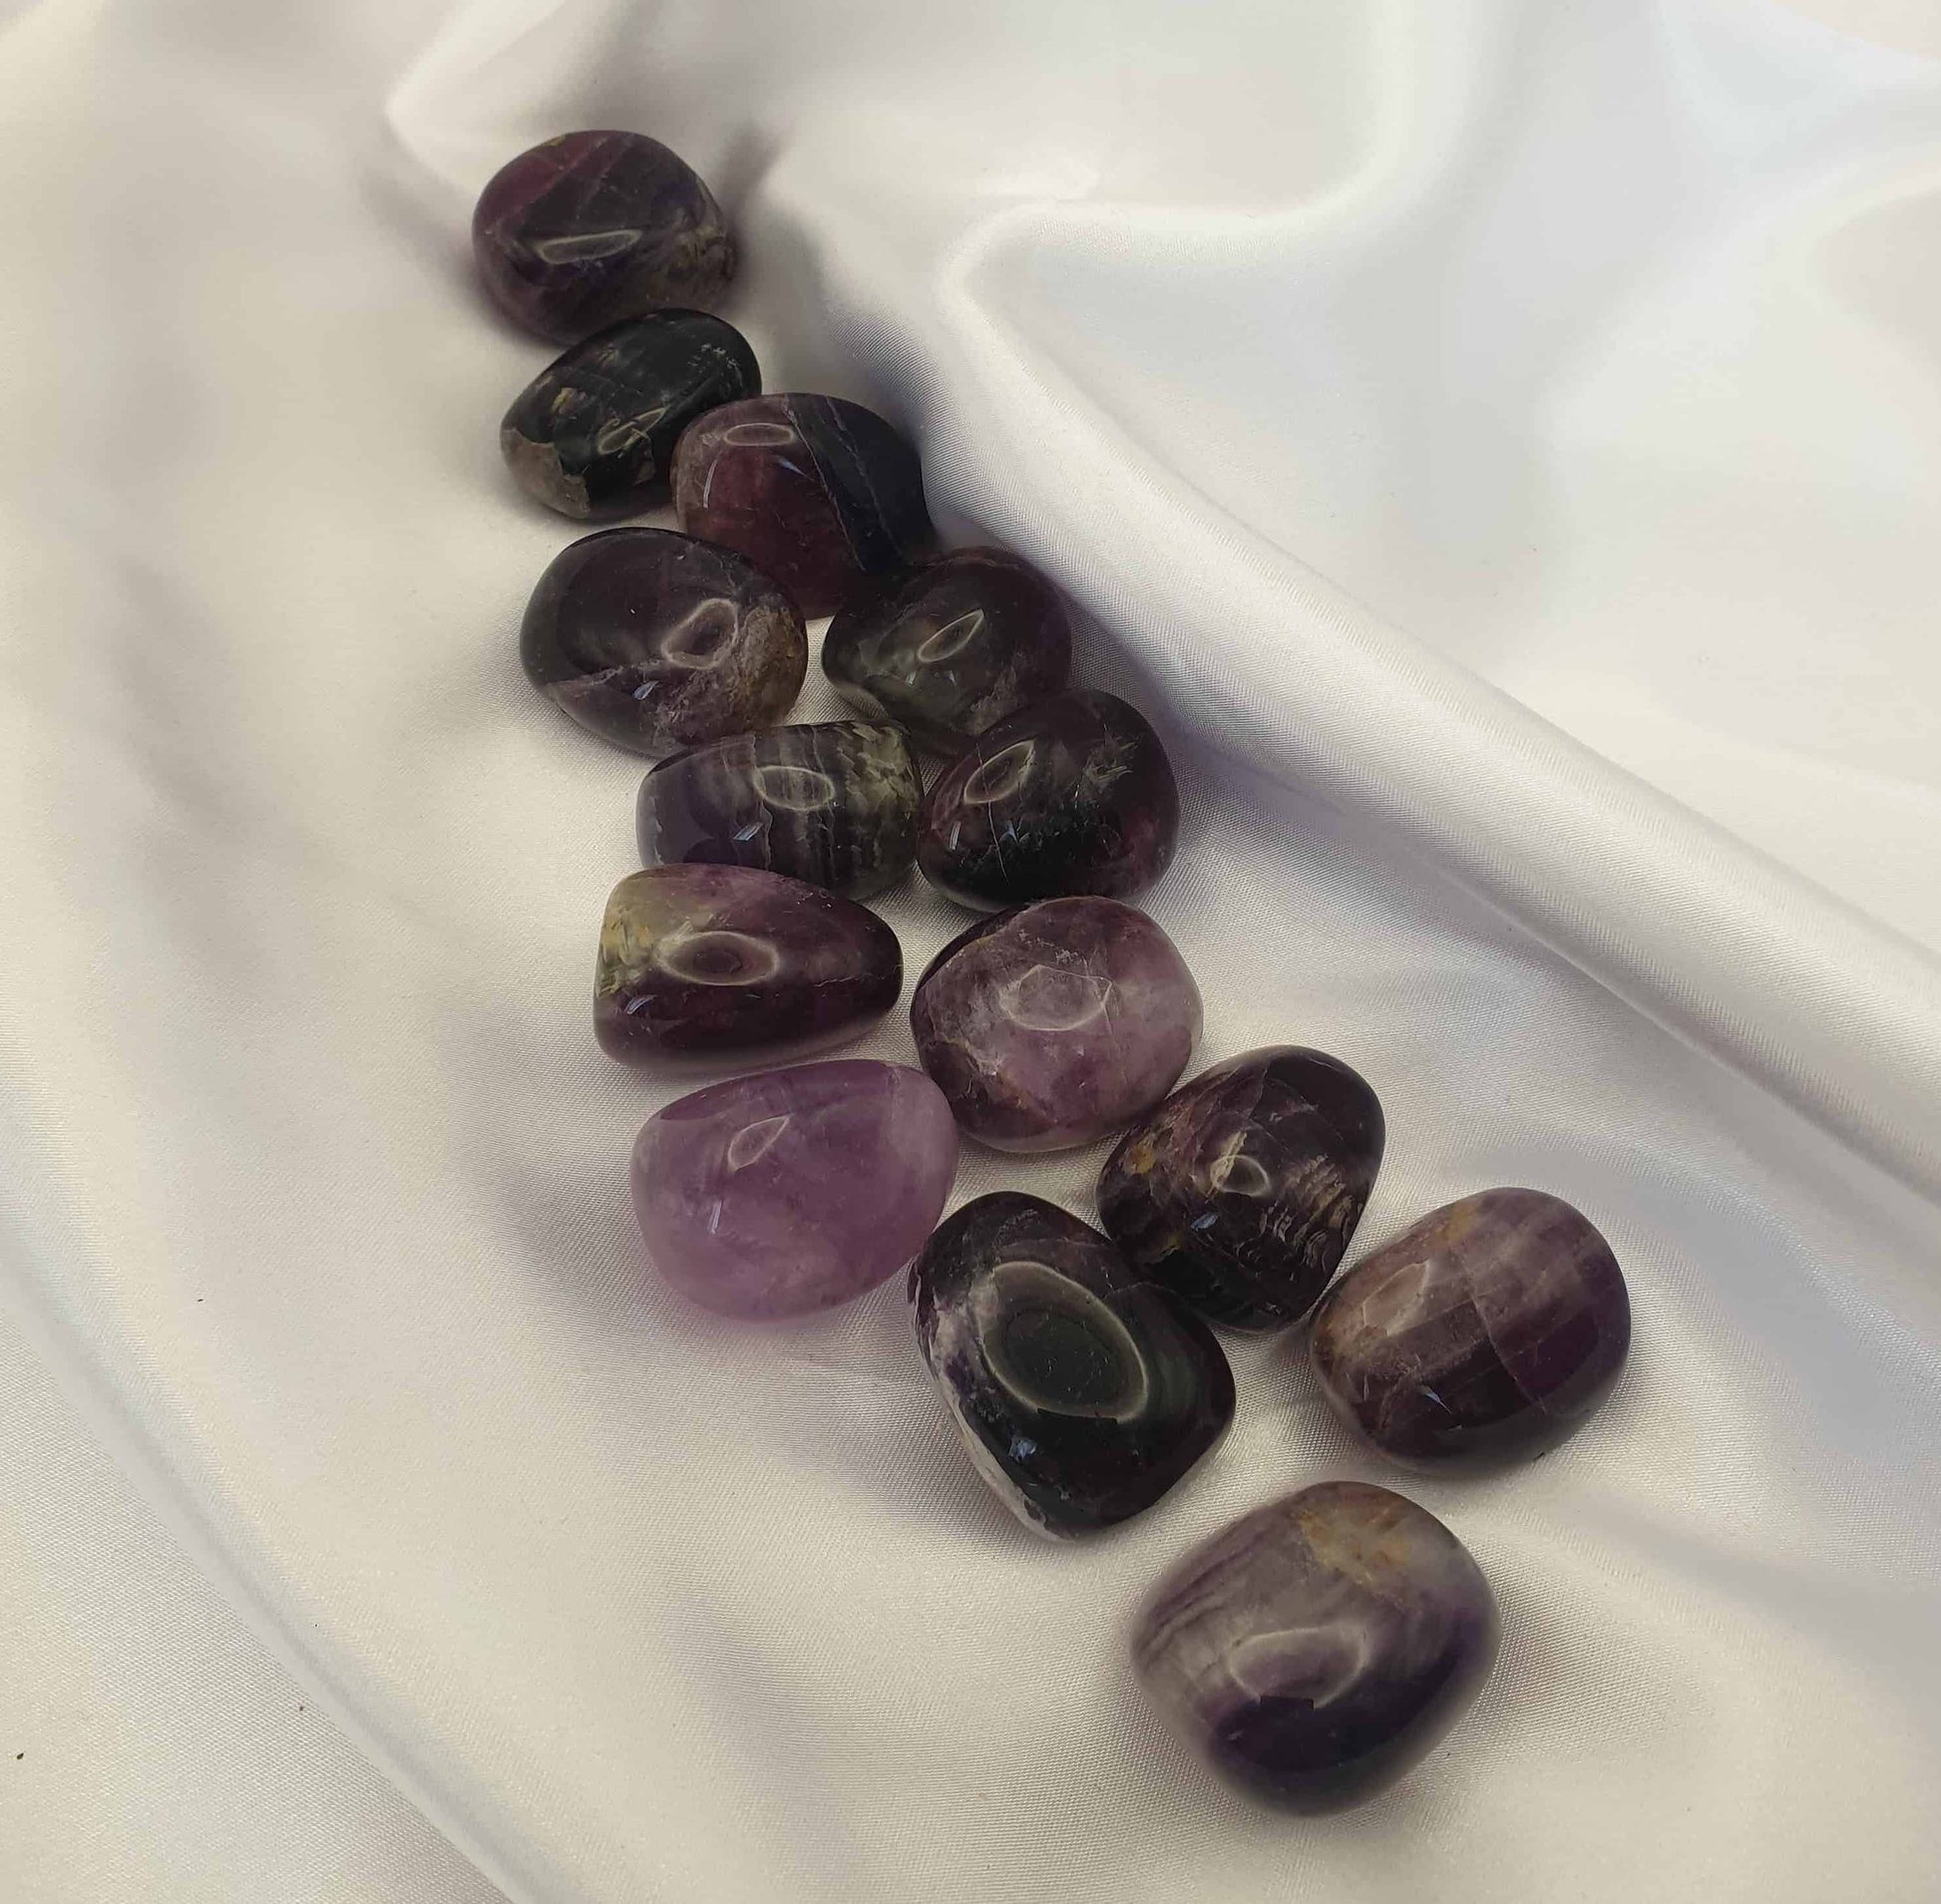 Purple Flourite is known to be a crystal of protection, whilst it can help with increased focus and deeper levels of thinking, so carrying a purple flourite tumbled stone may  help with creativity and being able to think outside the box.